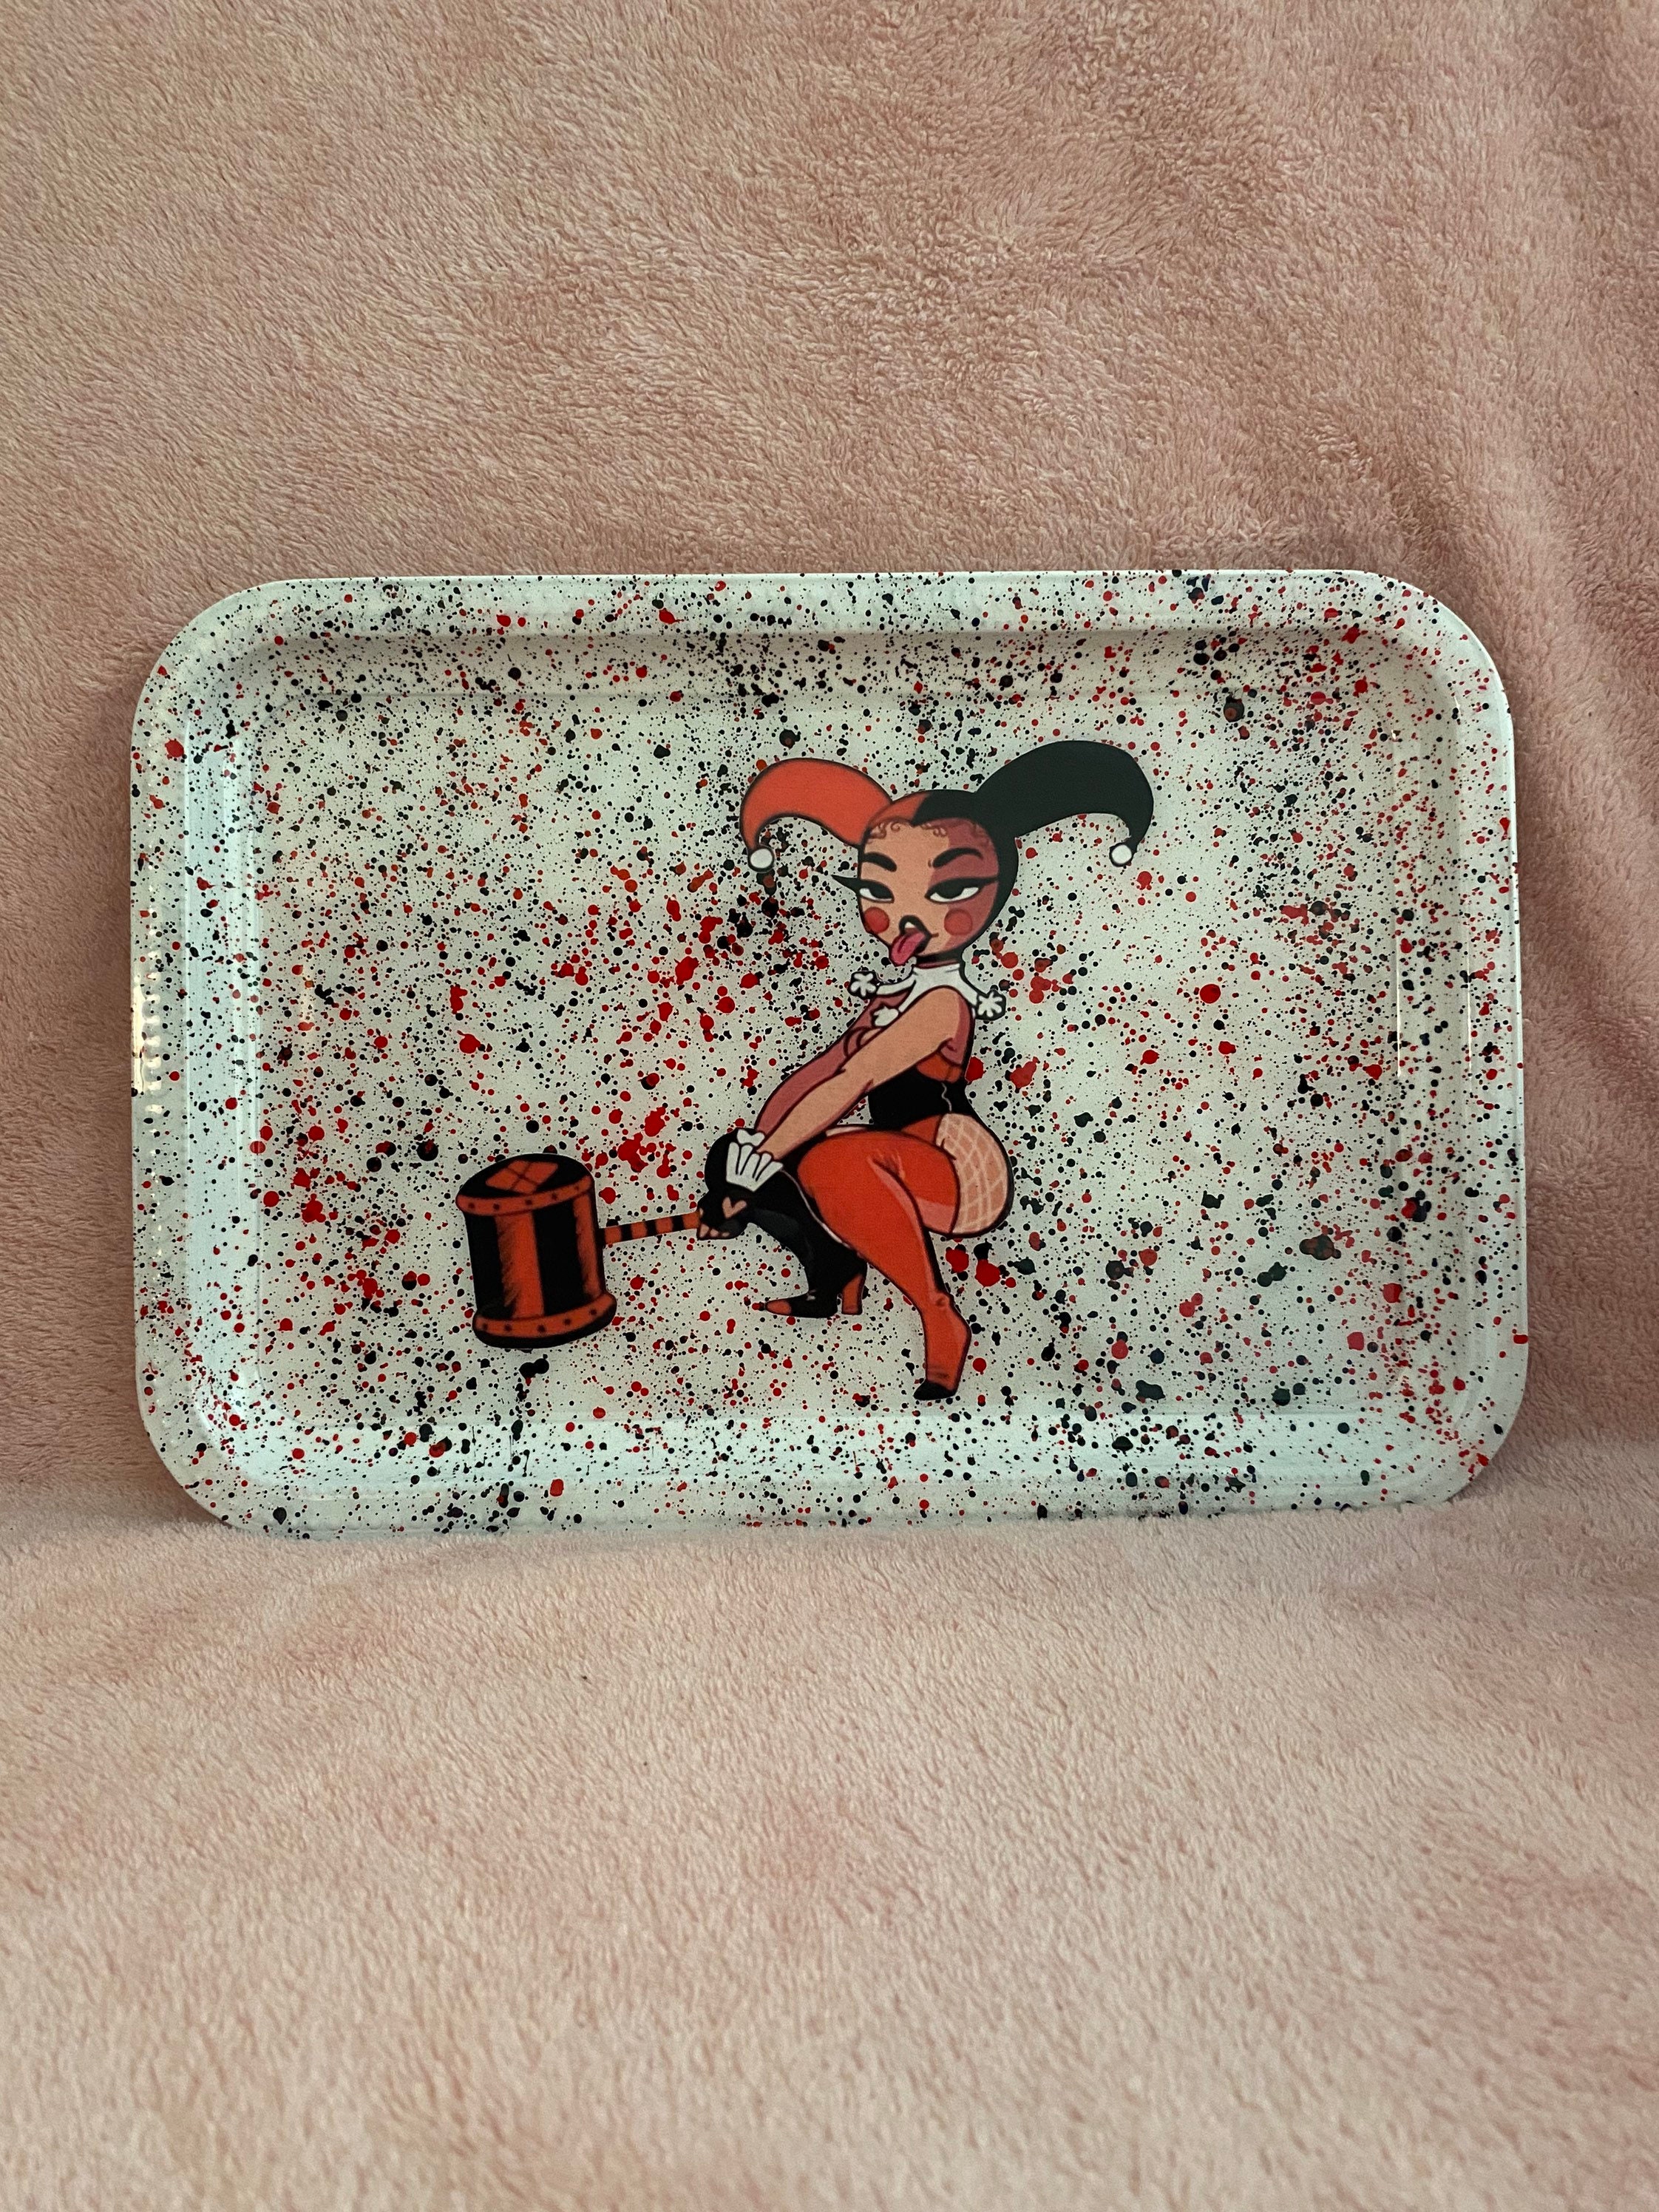 Anime Herb Tobacco Smoking Custom Rolling Tray  China Rolling Tray and  Metal Tray price  MadeinChinacom